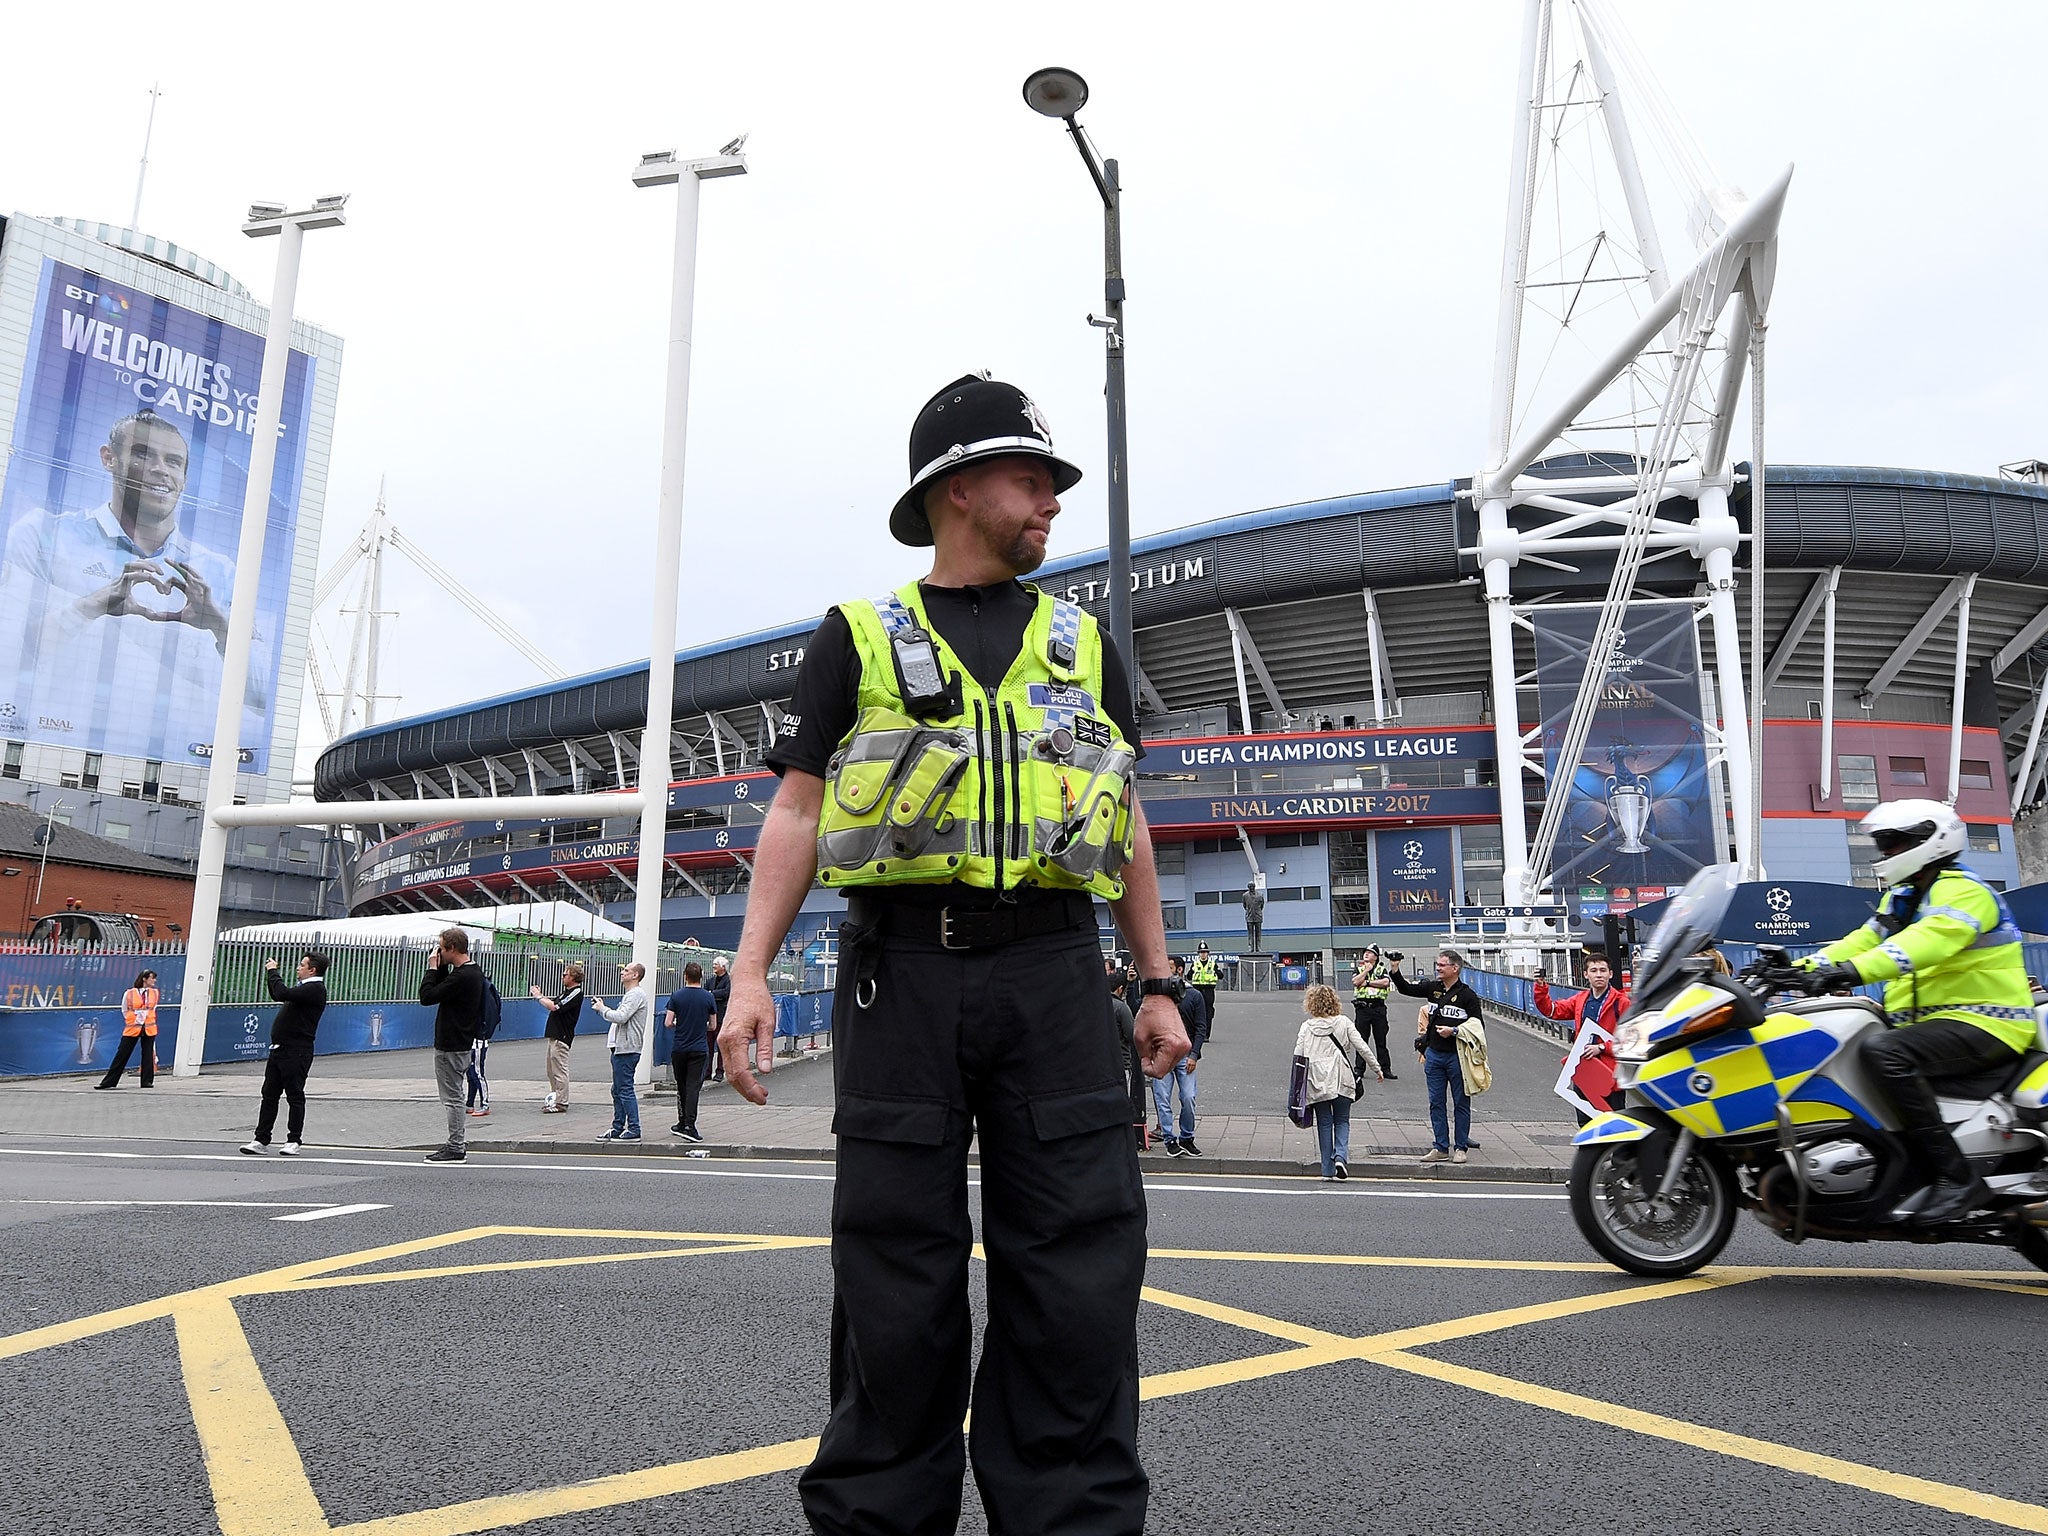 Prosecutors say a Justin Bieber concert at Cardiff's Principality Stadium may have been the planned target